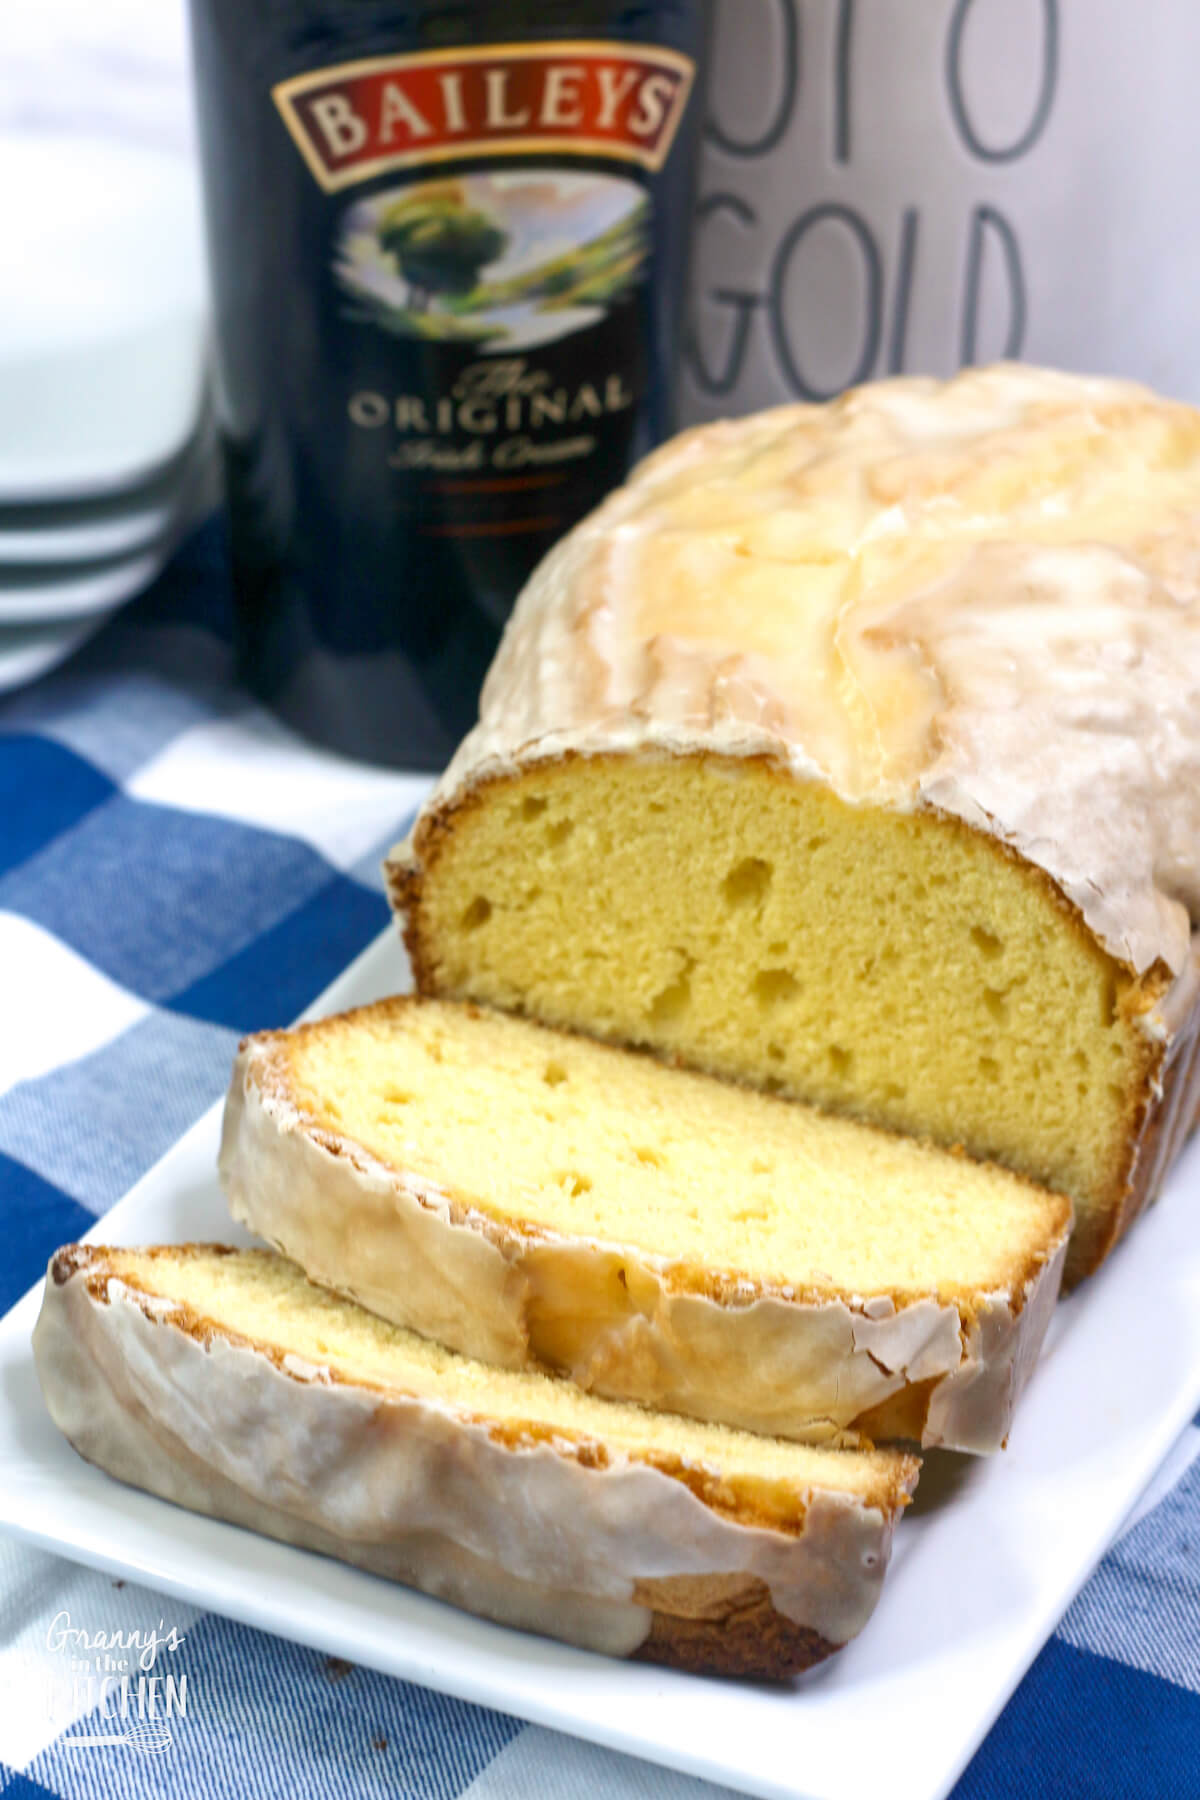 loaf of pound cake with bottle of Bailey's in background